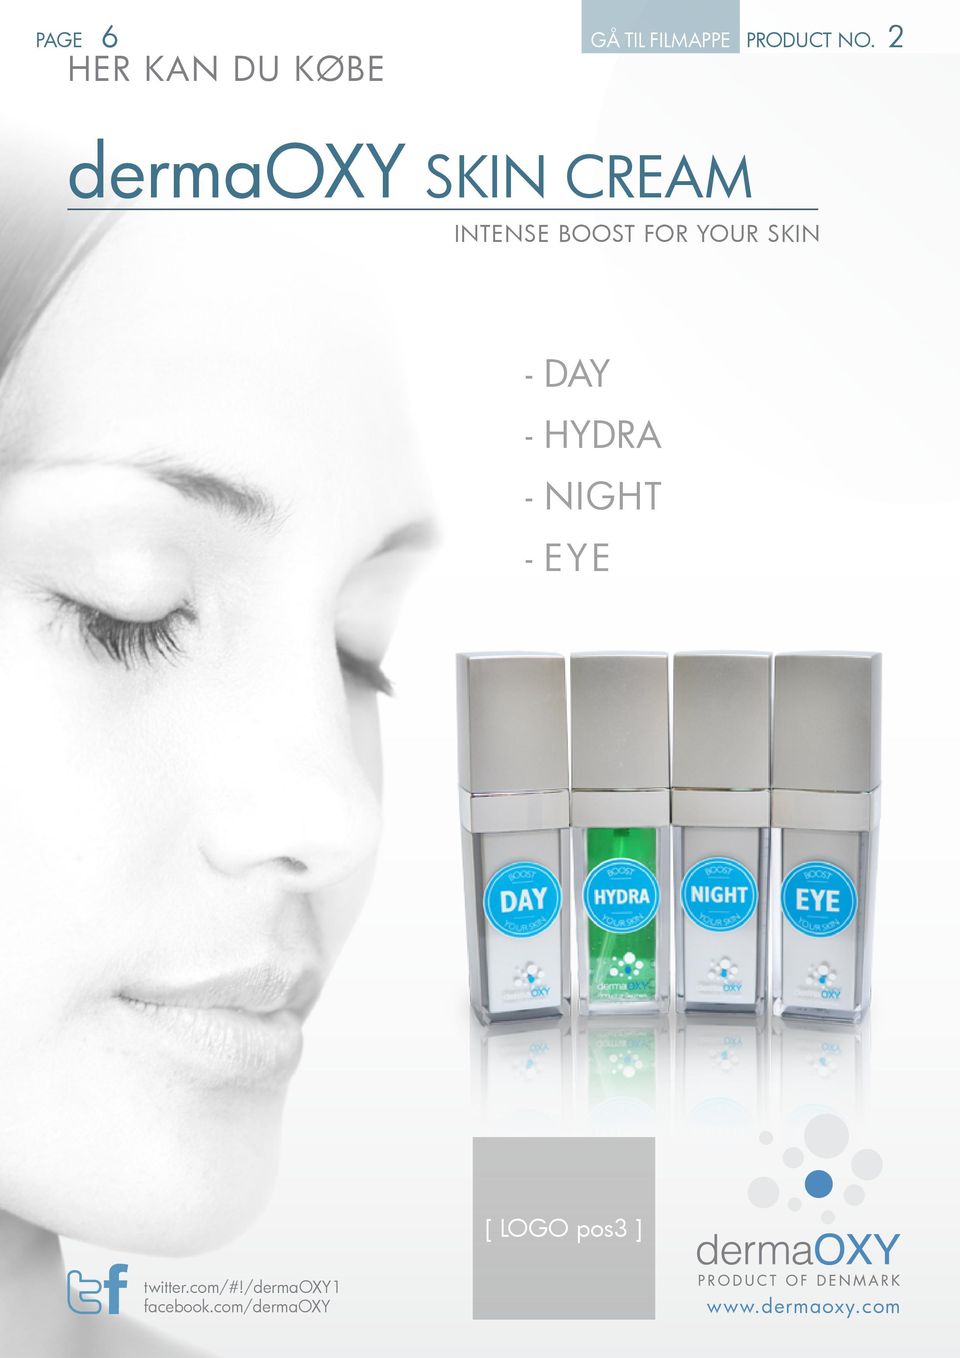 CREAM INTENSE BOOST FOR YOUR